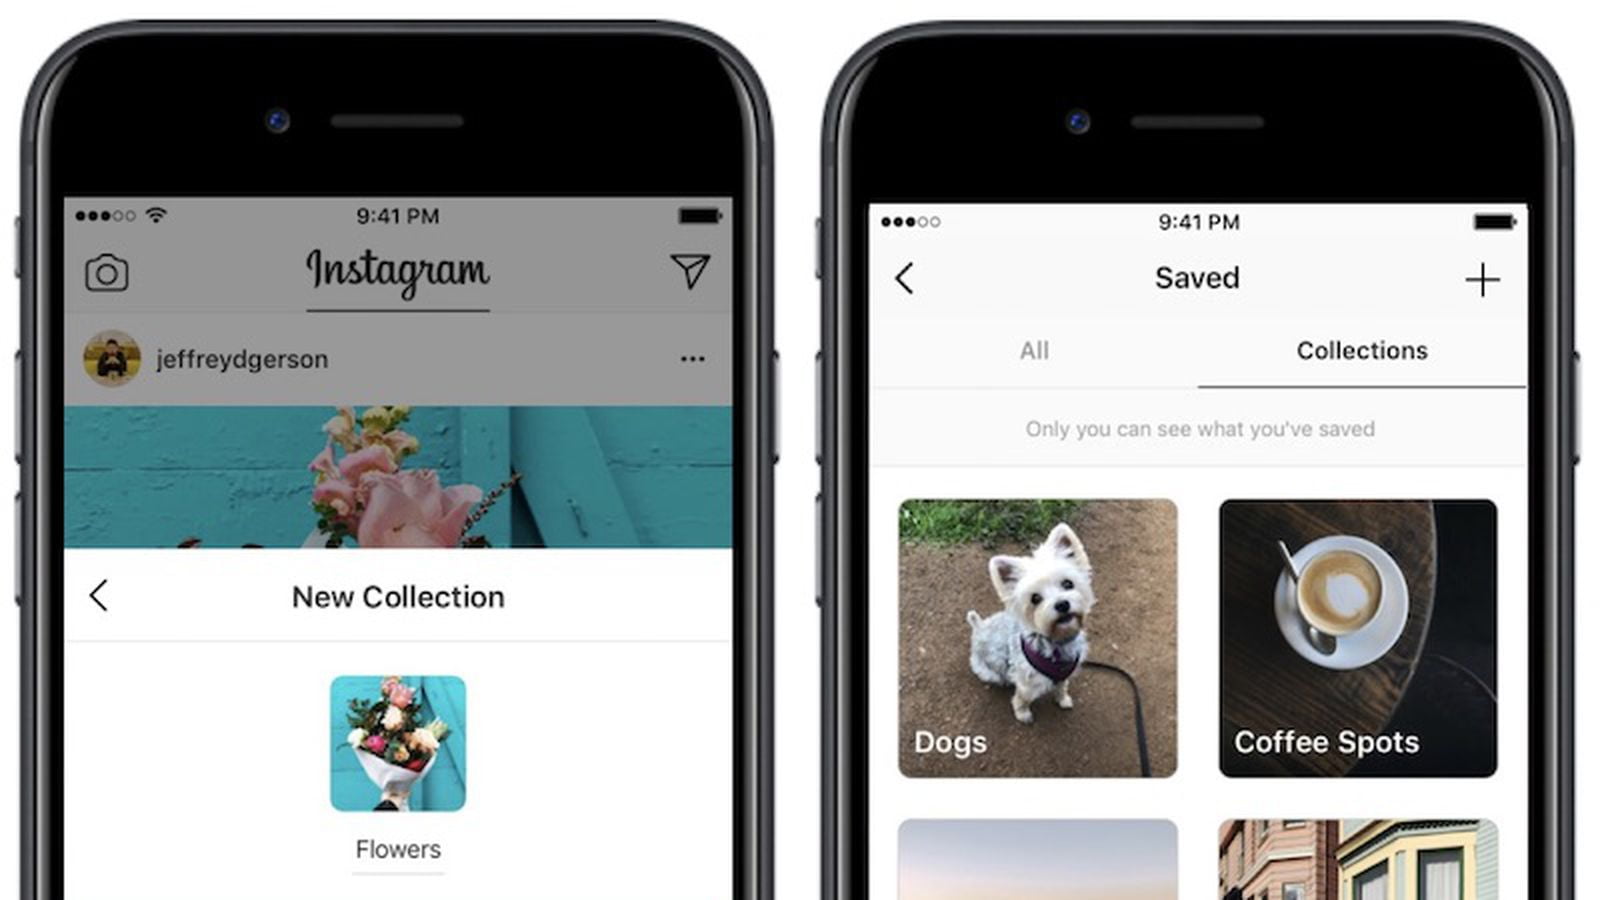 How to save Instagram posts and create collections?